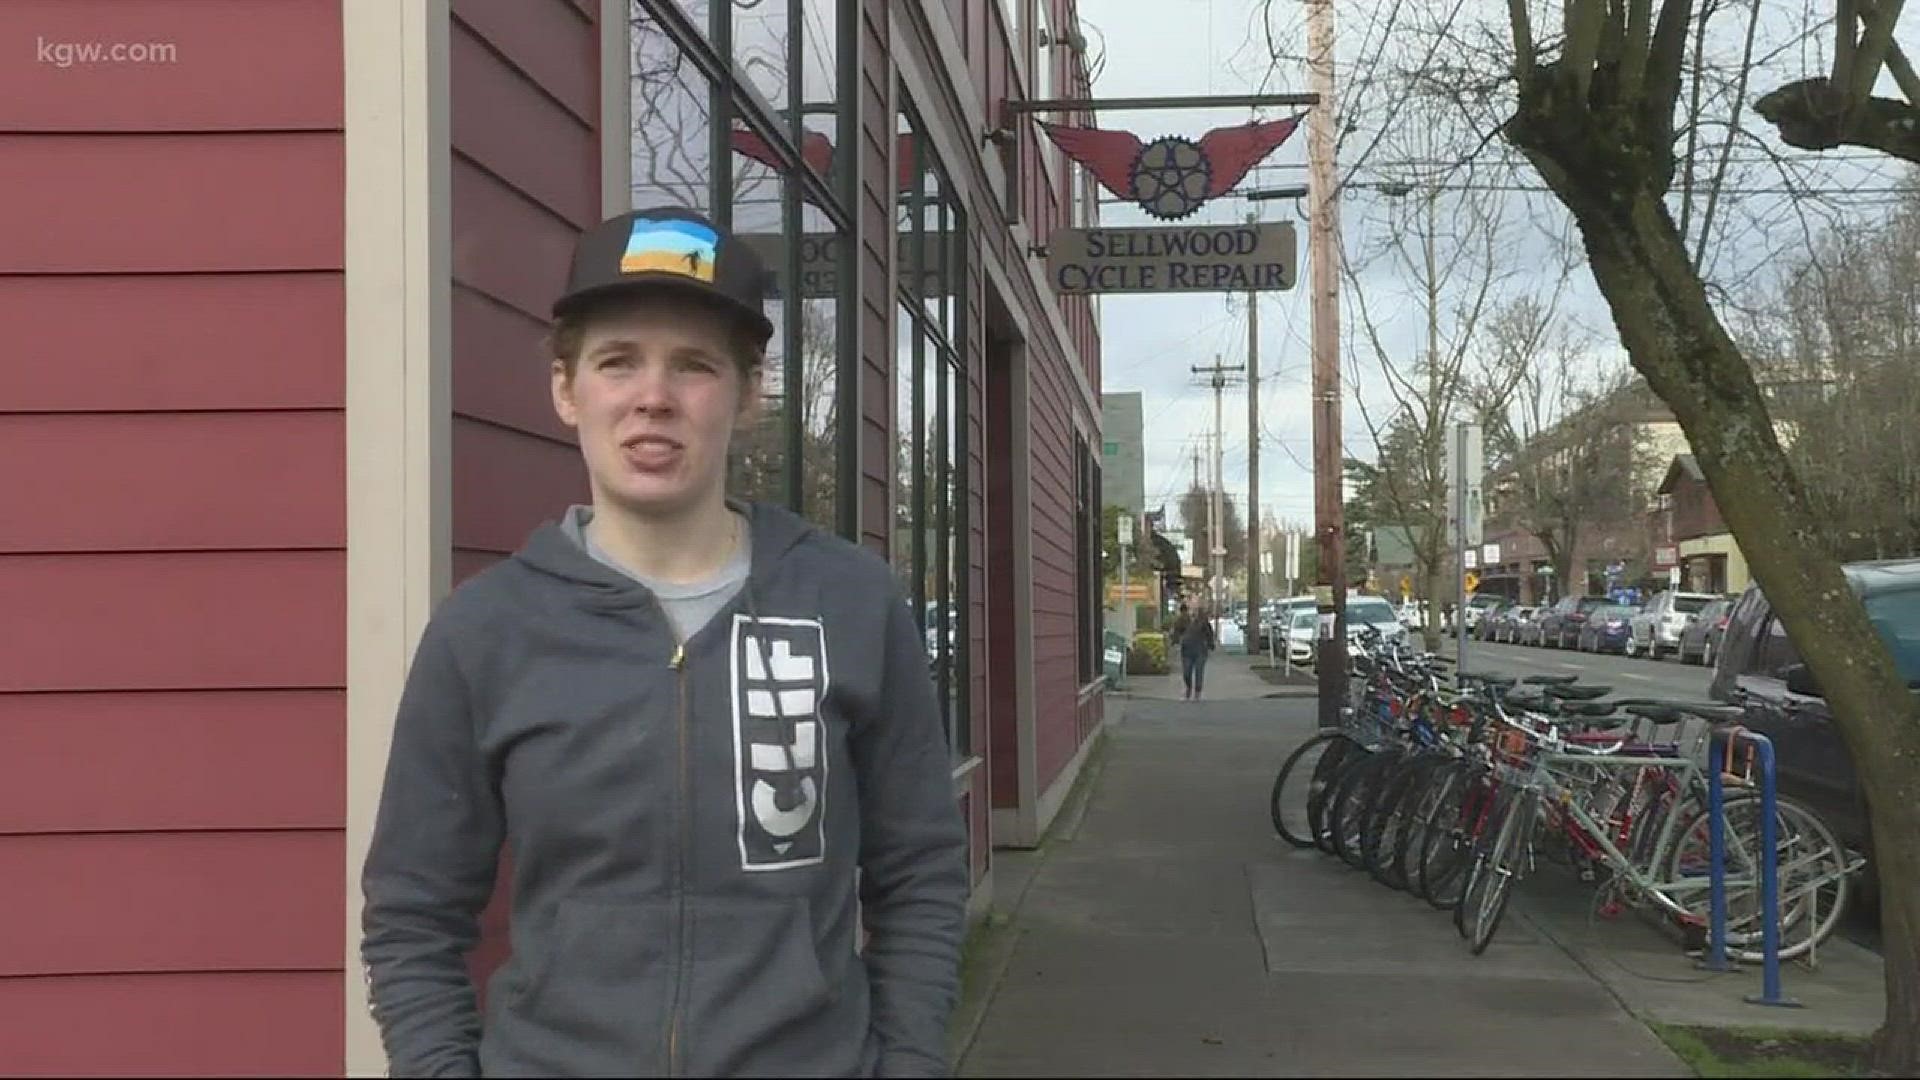 A Portland woman is going to compete on a world stage in cyclocross.